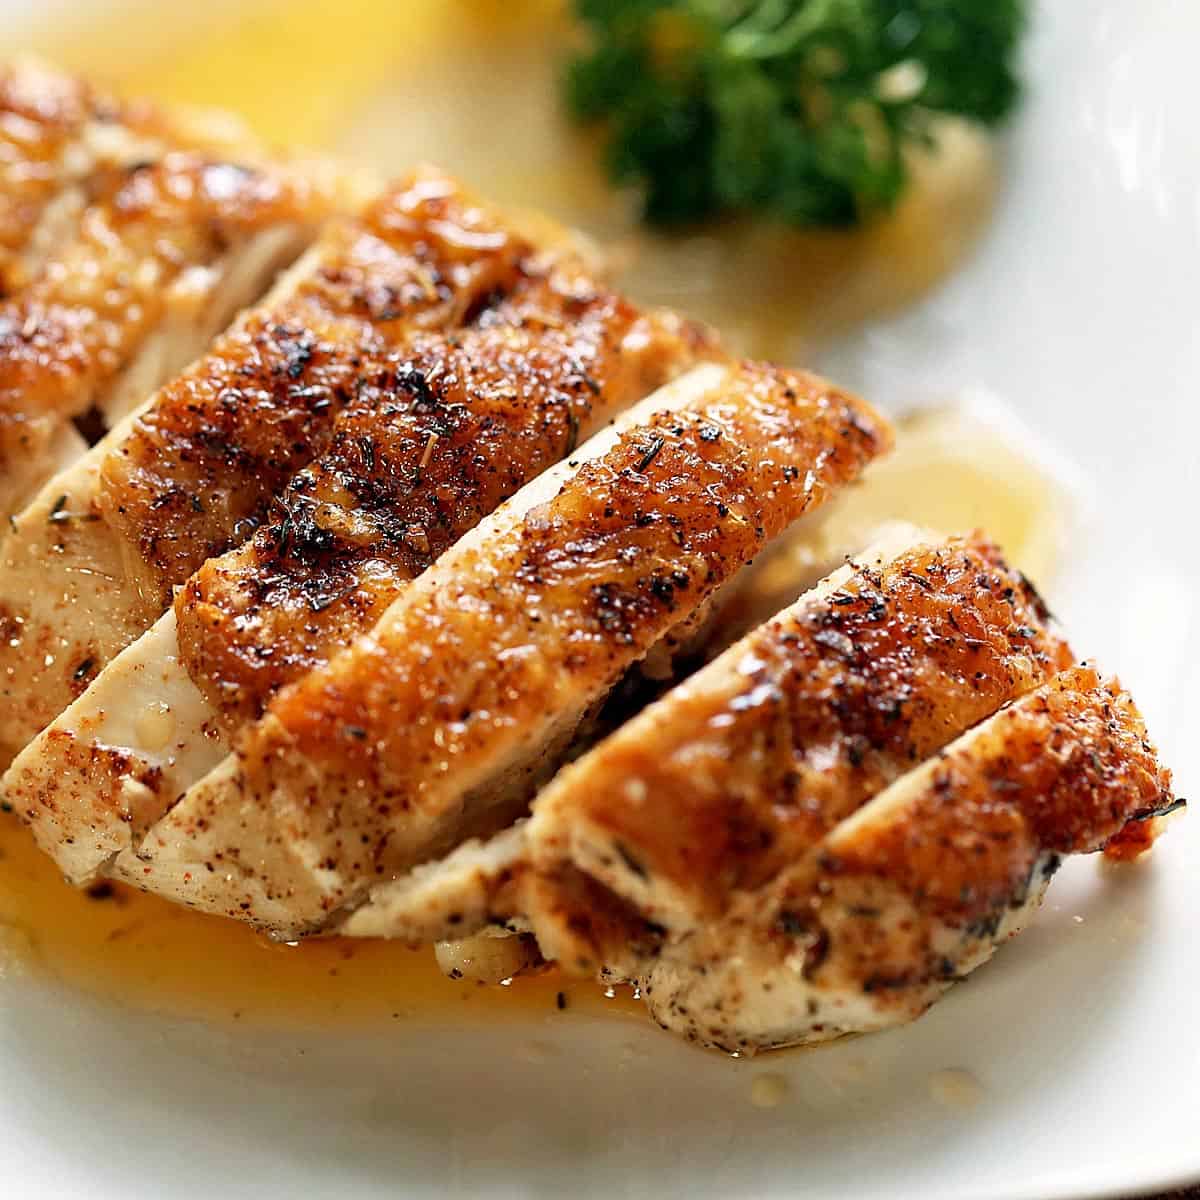 Sliced skin-on chicken breast on a white plate.